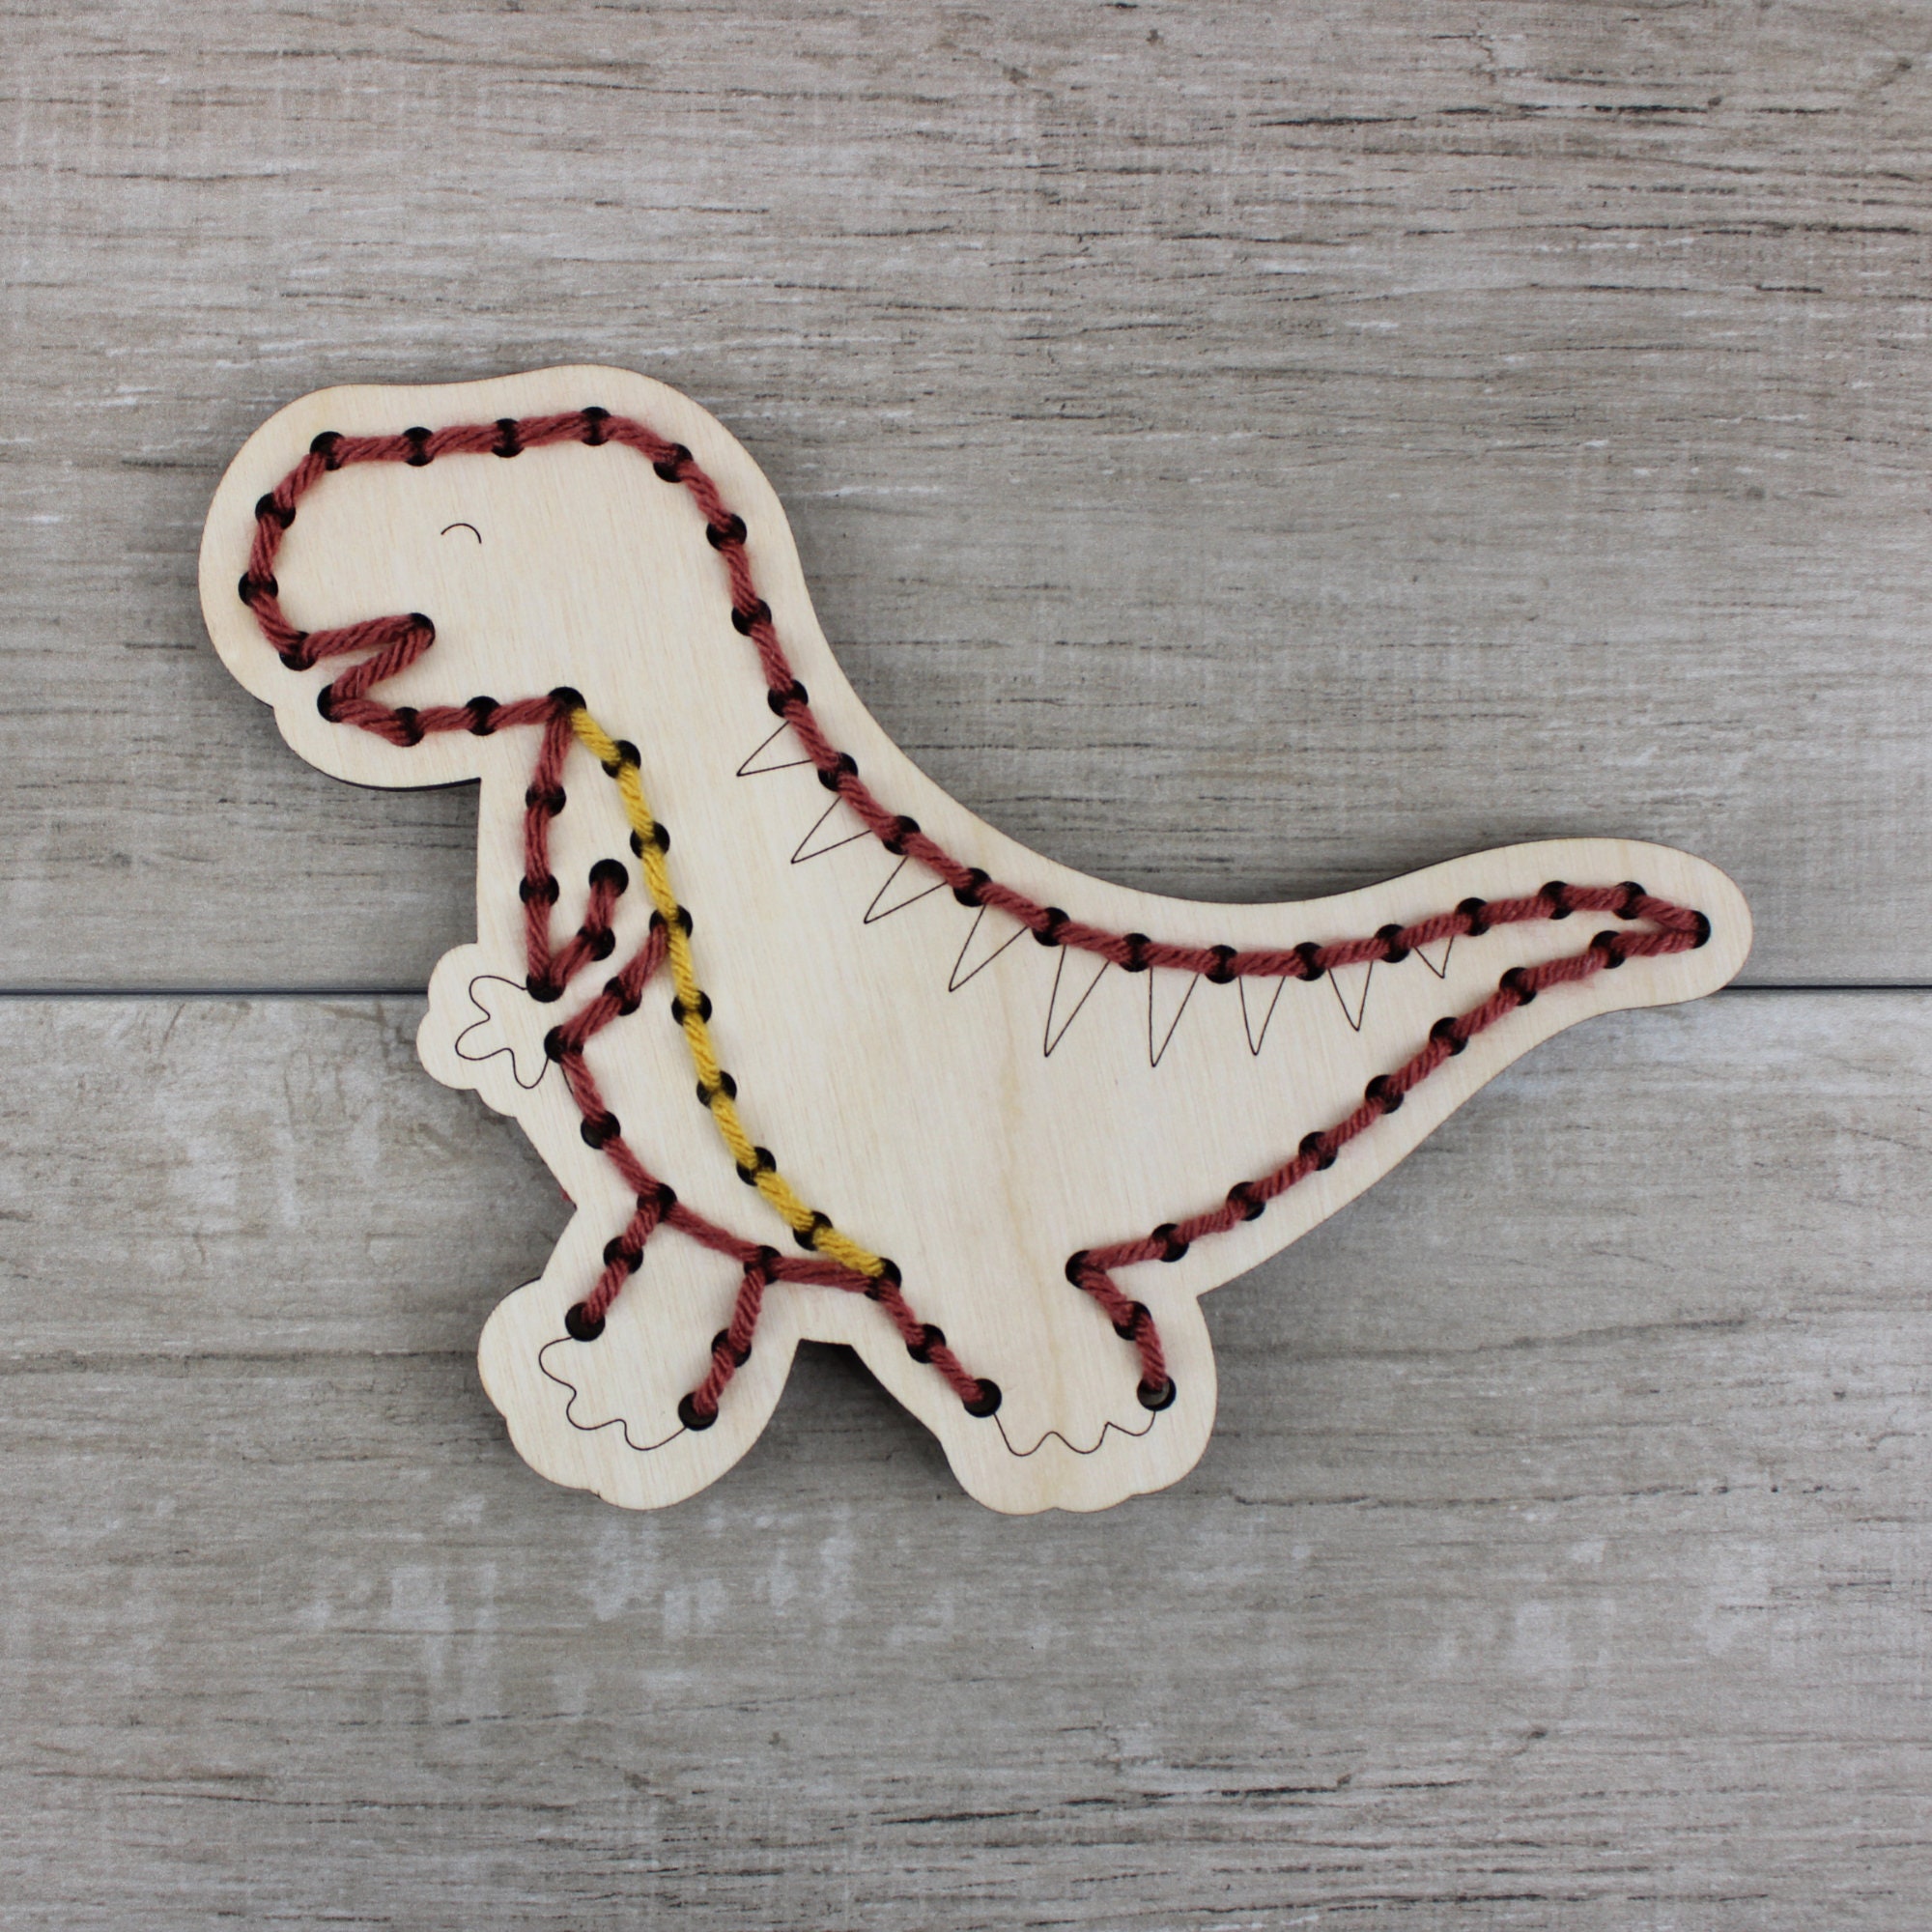 Dinosaur Yarn Embroidery Kit, Trex Craft Project, First Sewing Learn To Embroider  Kit For Kids, Boy Montesorri Toys - Yahoo Shopping